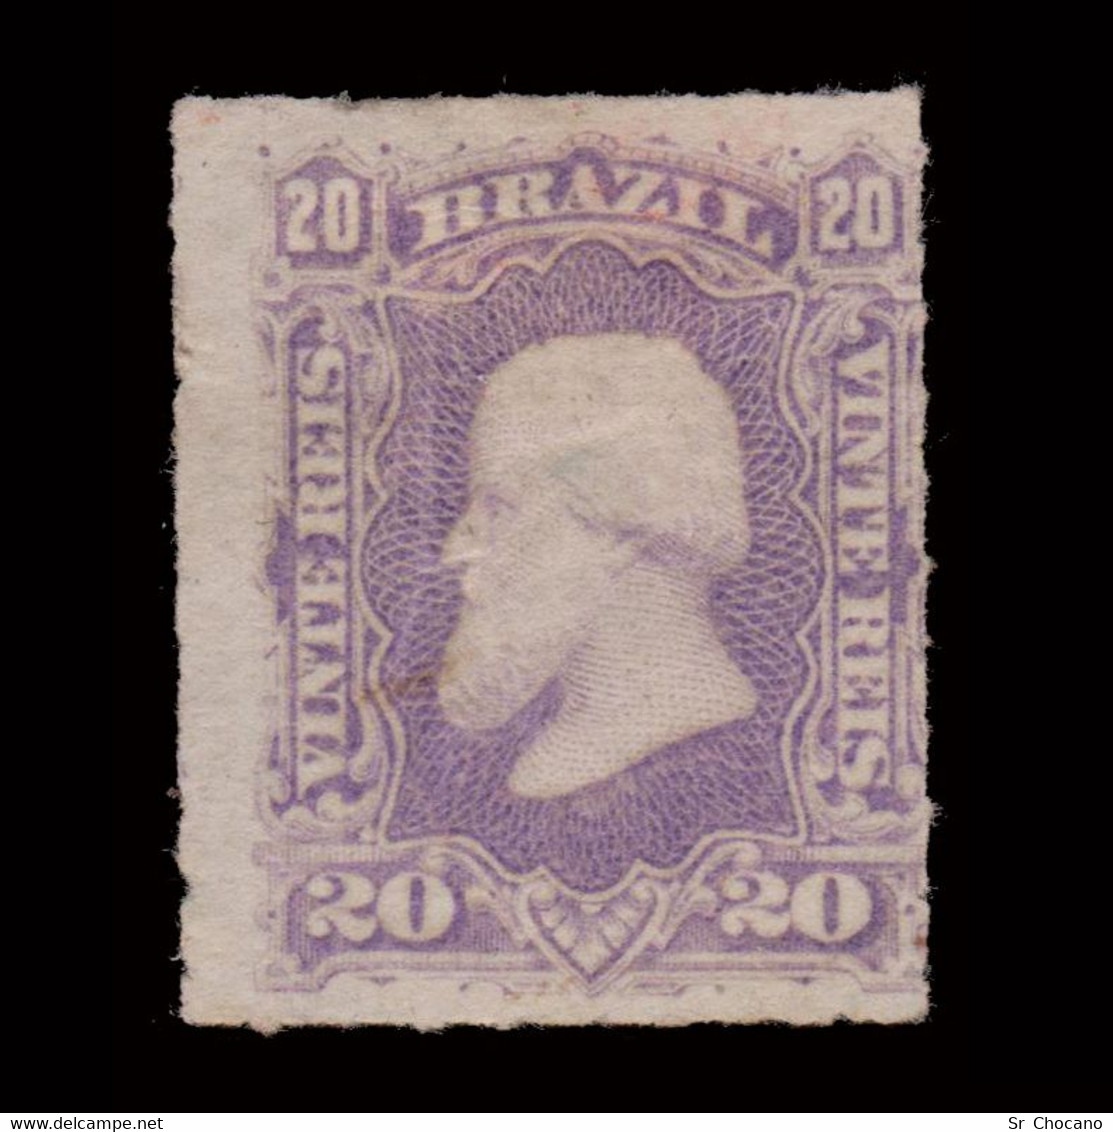 BRAZIL.1878-9.PEDRO II.20r.SCOTT 20.MNG.ROULETTED - Unused Stamps